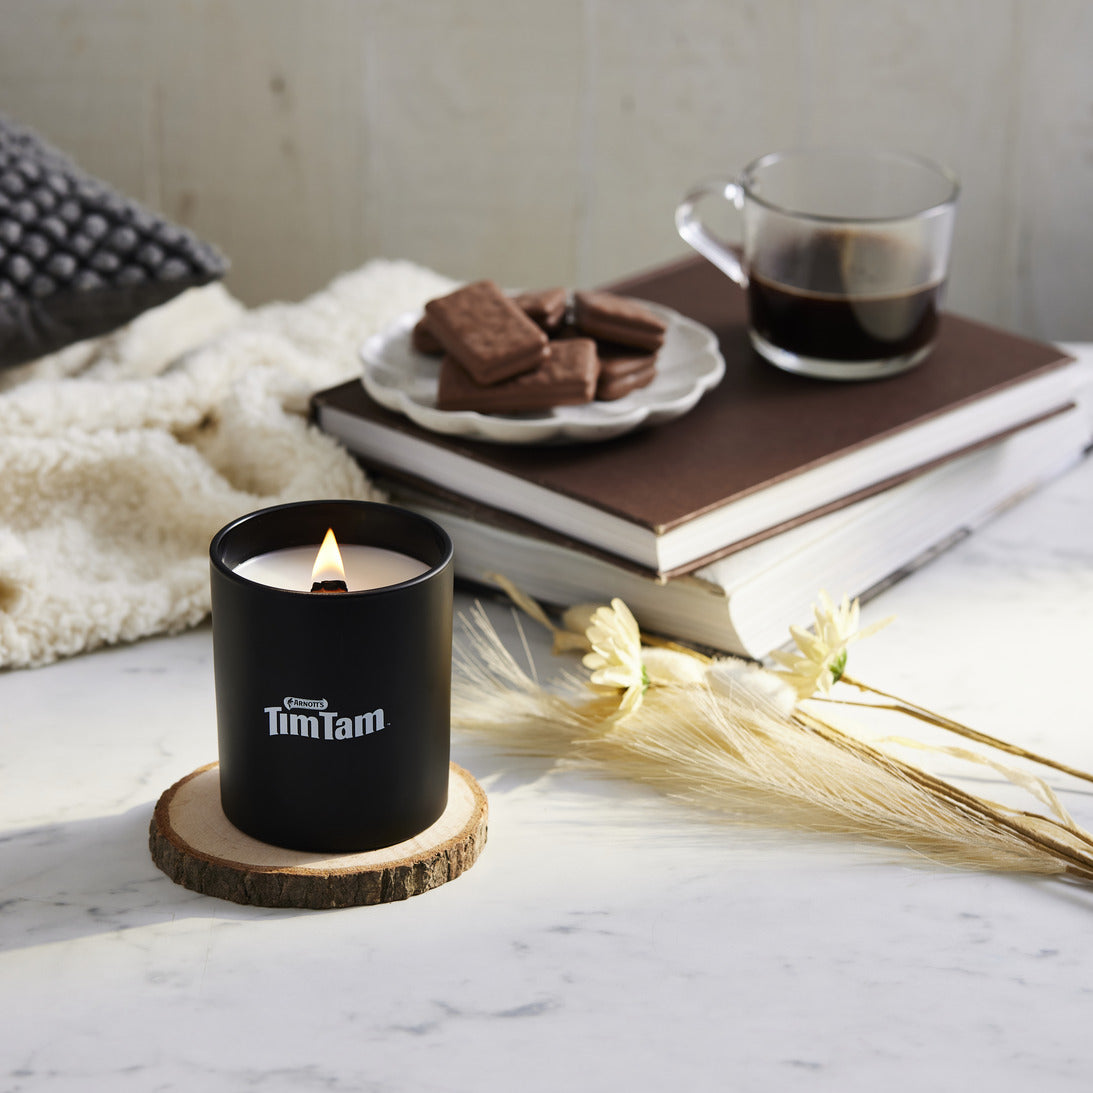 Tim Tam Candle, pictured with biscuits and black coffee